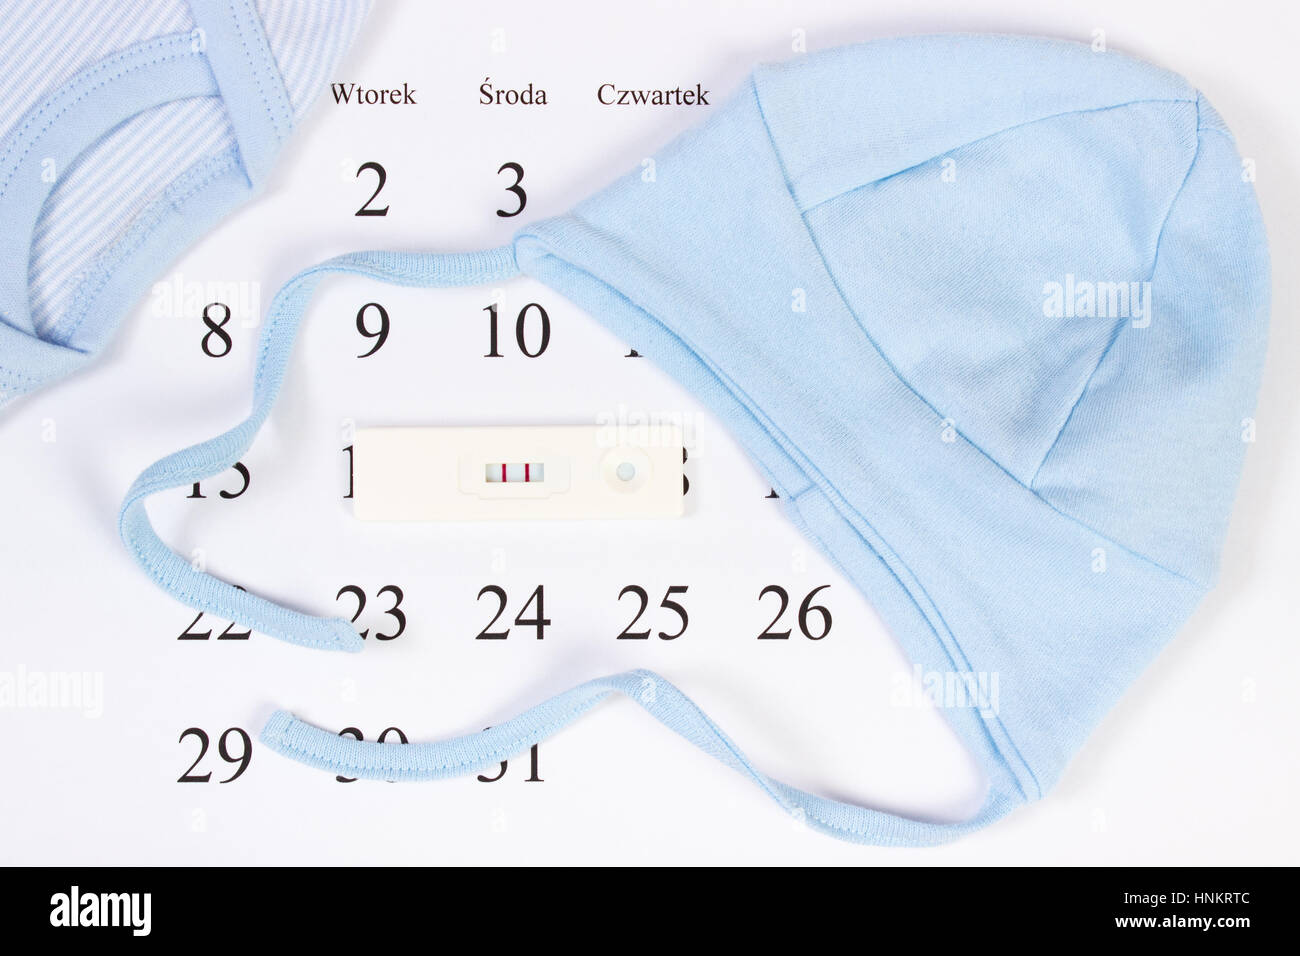 Pregnancy test with positive result and clothing for newborn on calendar with polish inscription, concept of extending family and expecting for baby Stock Photo